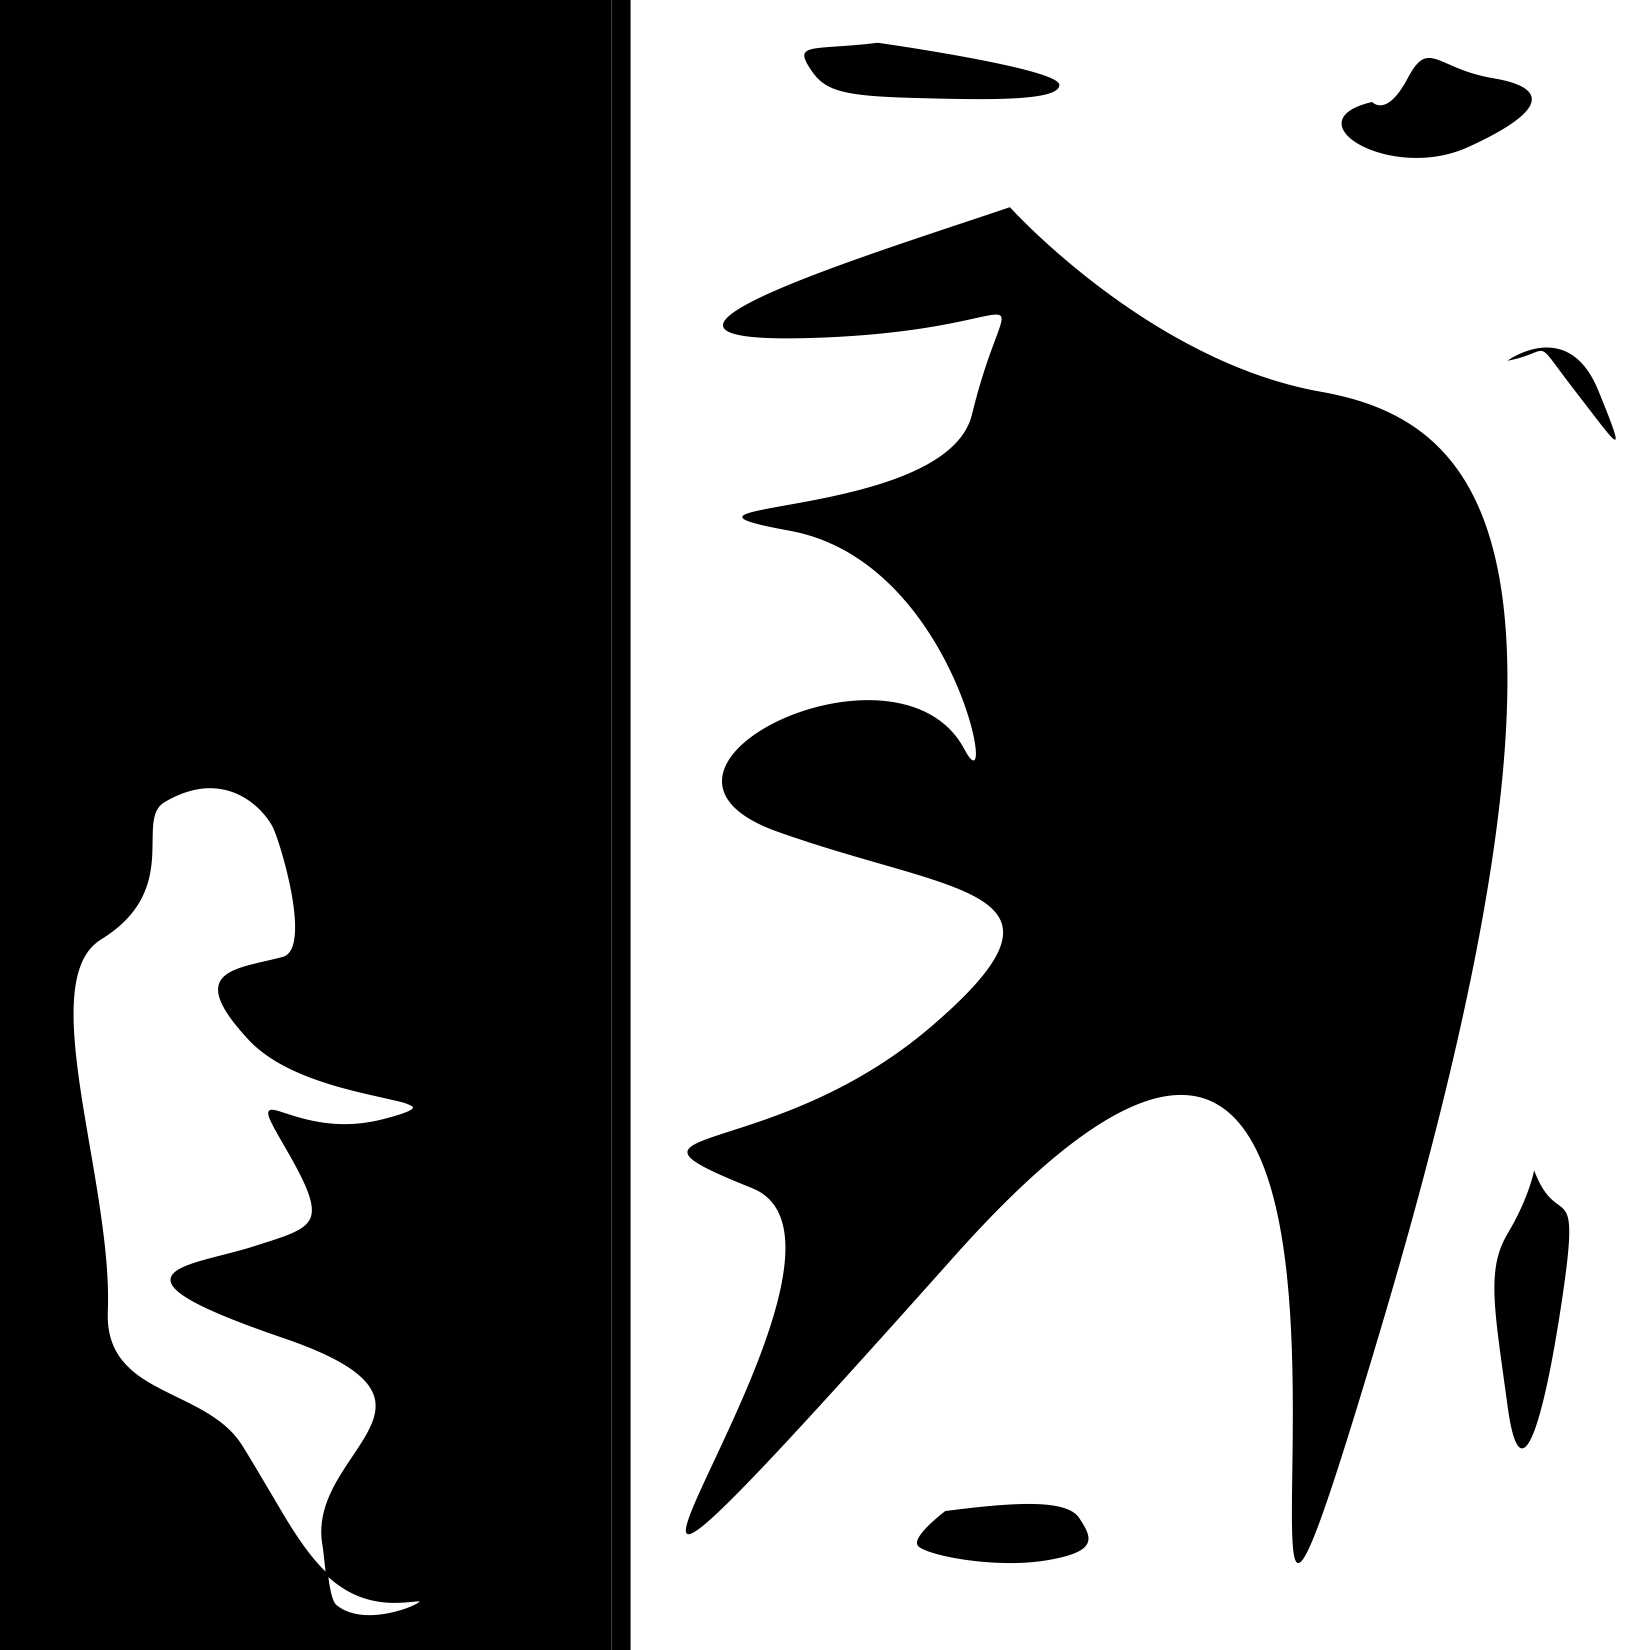 Abstract artwork of black and white shapes